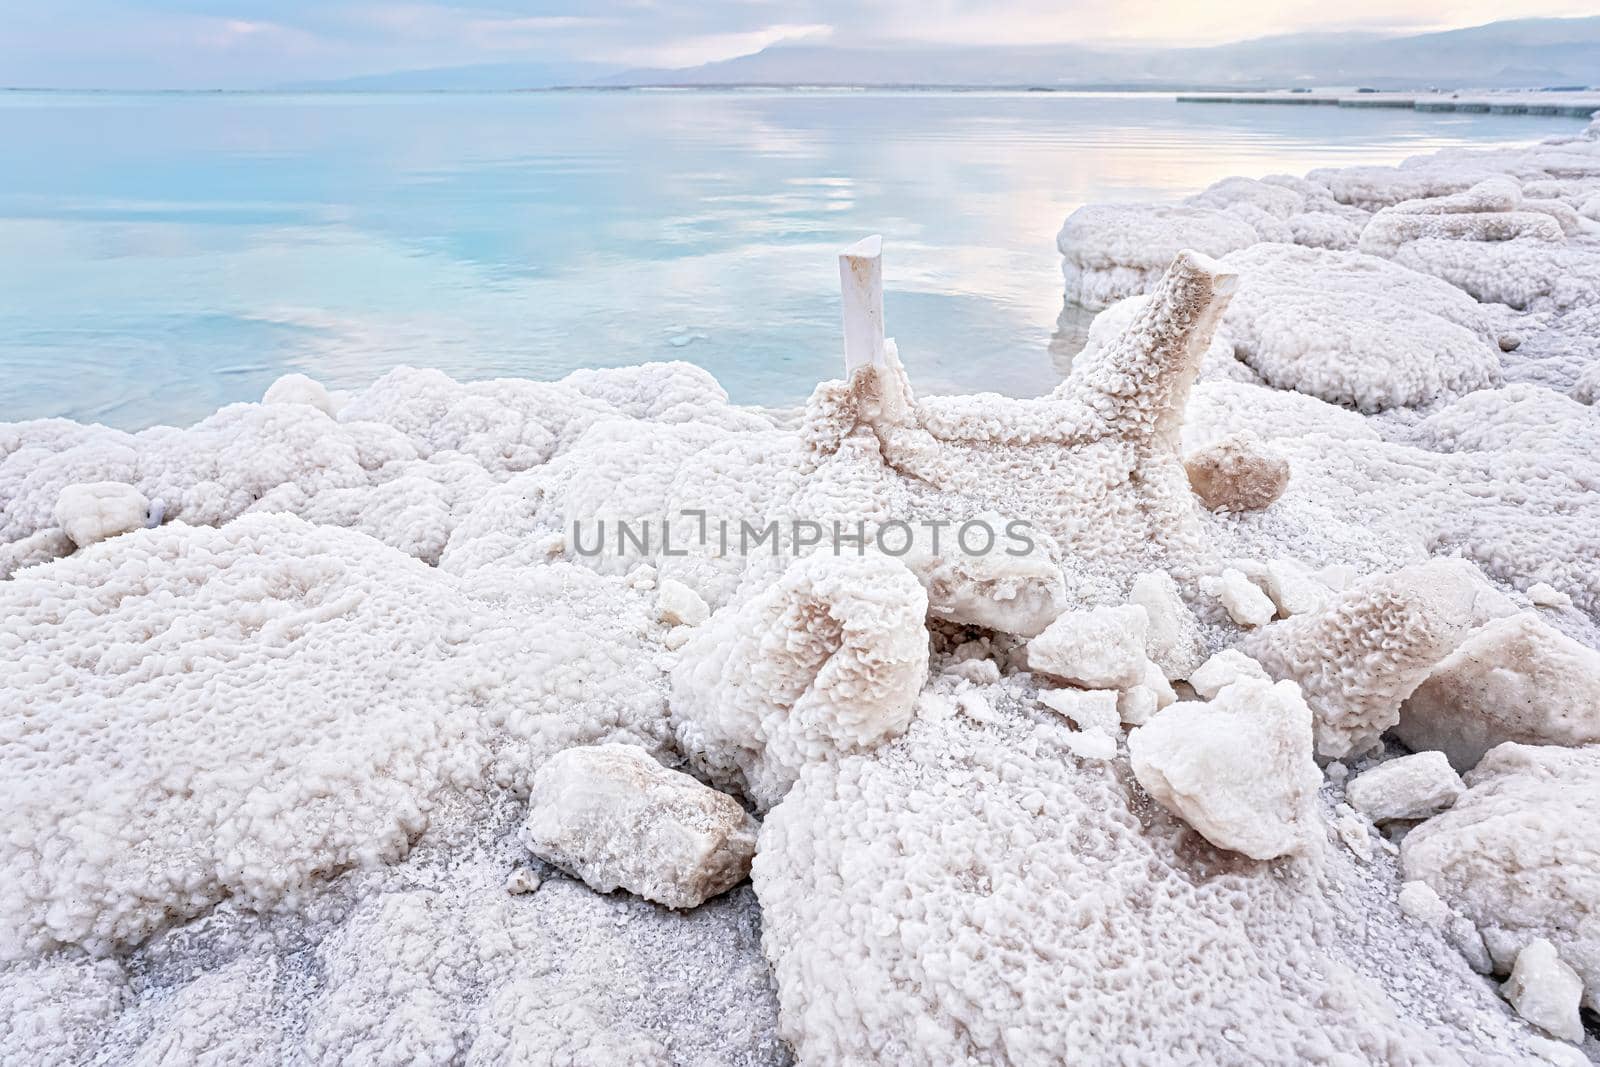 Small plastic chairs completely covered with crystalline salt on shore of dead sea, closeup detail, clear blue water near.